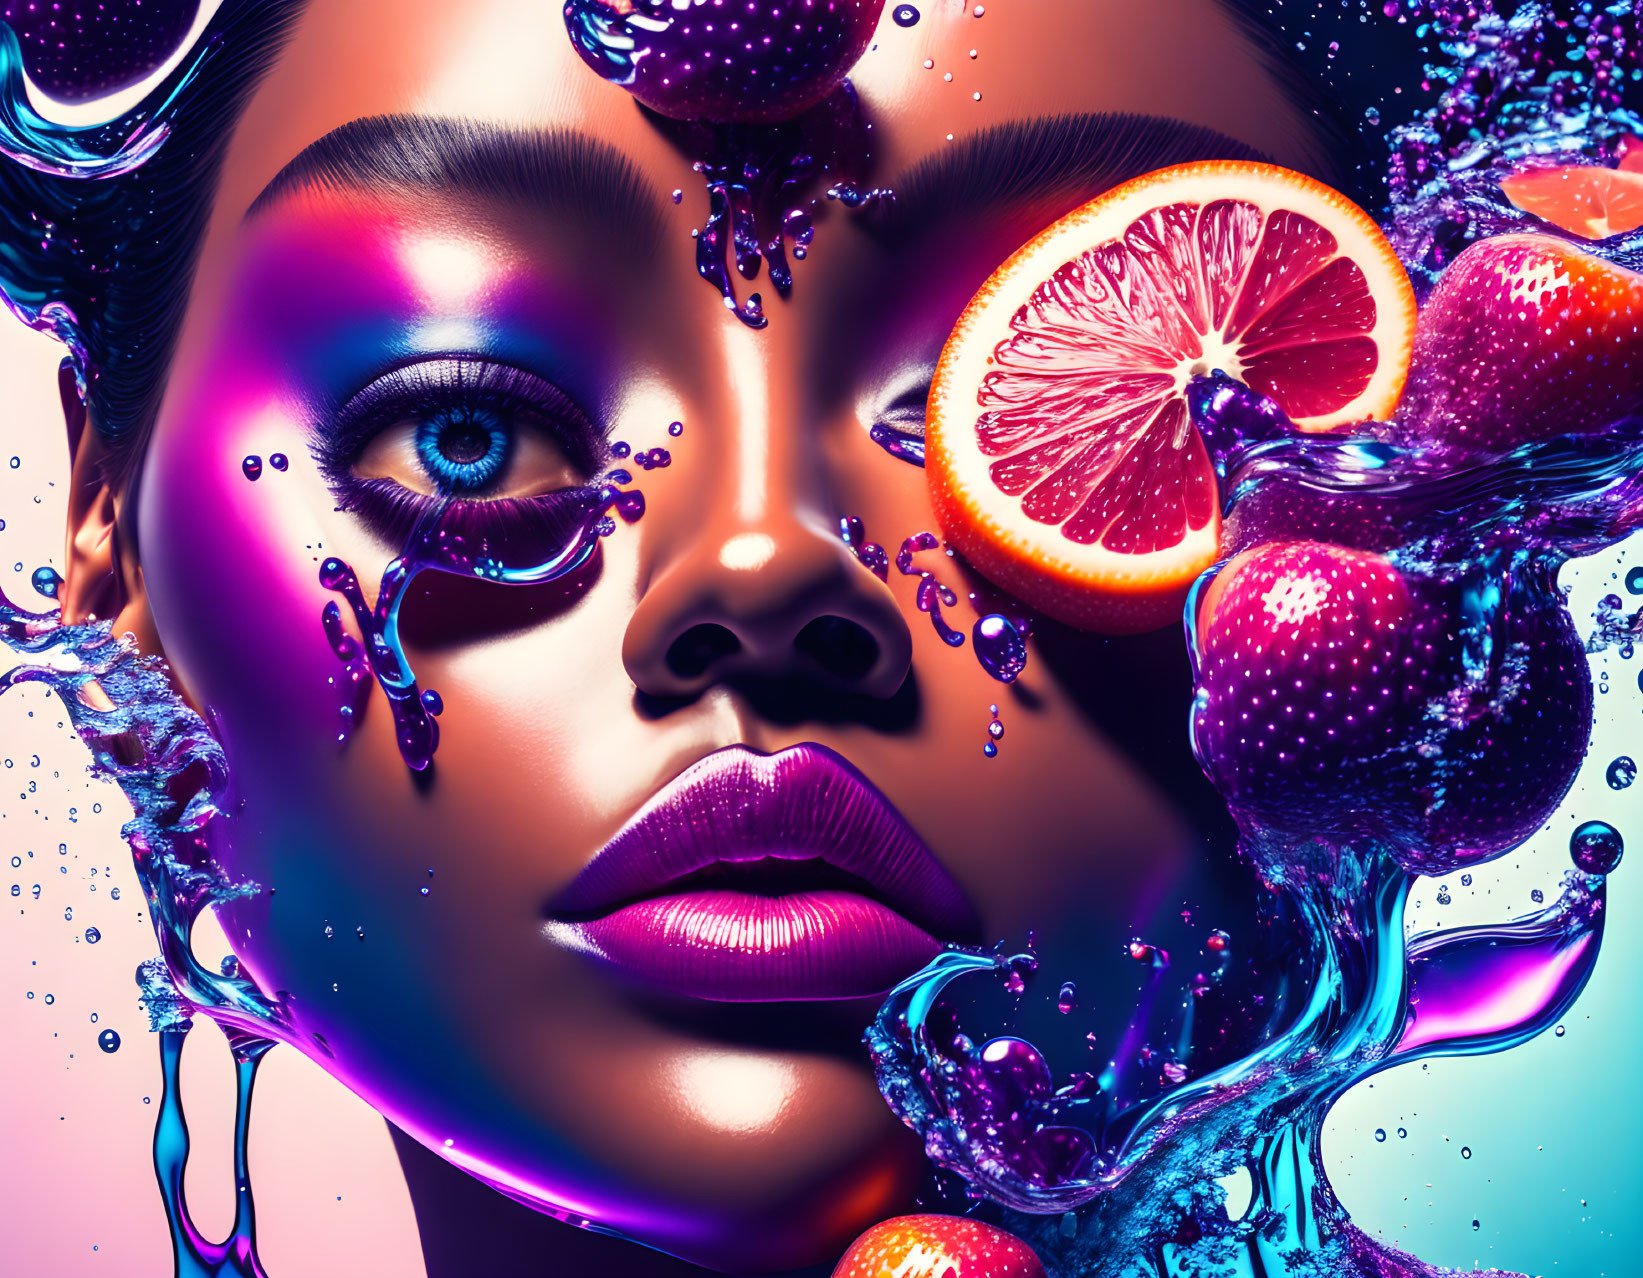 Colorful makeup close-up surrounded by water, bubbles, and fruit slices